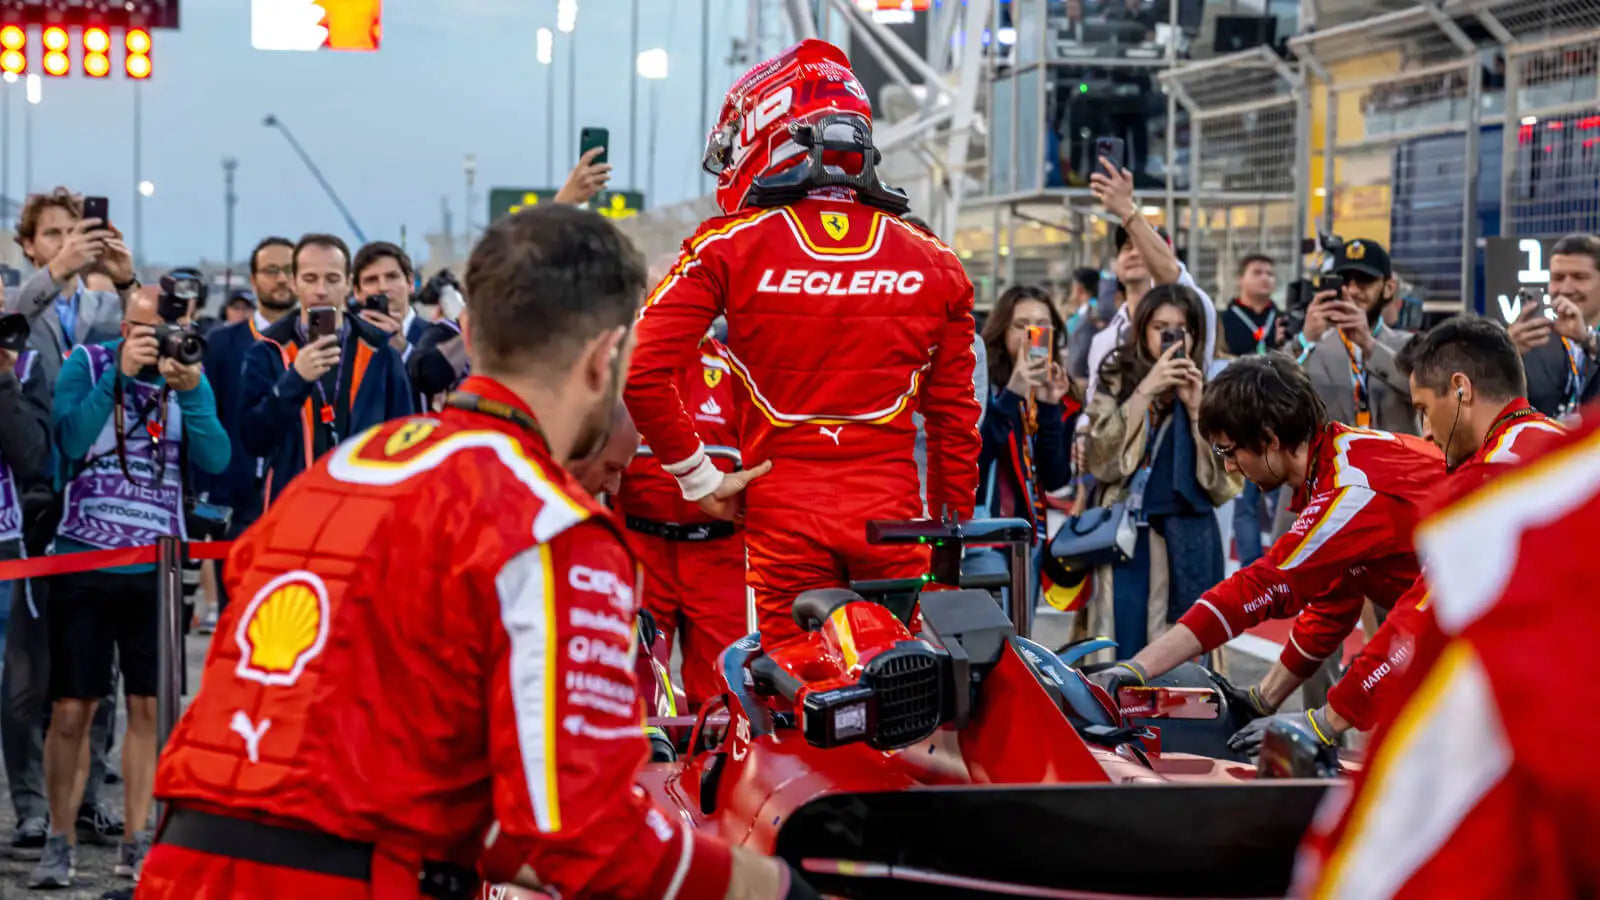 Charles Leclerc reveals huge pace deficit which affected Bahrain Grand Prix result